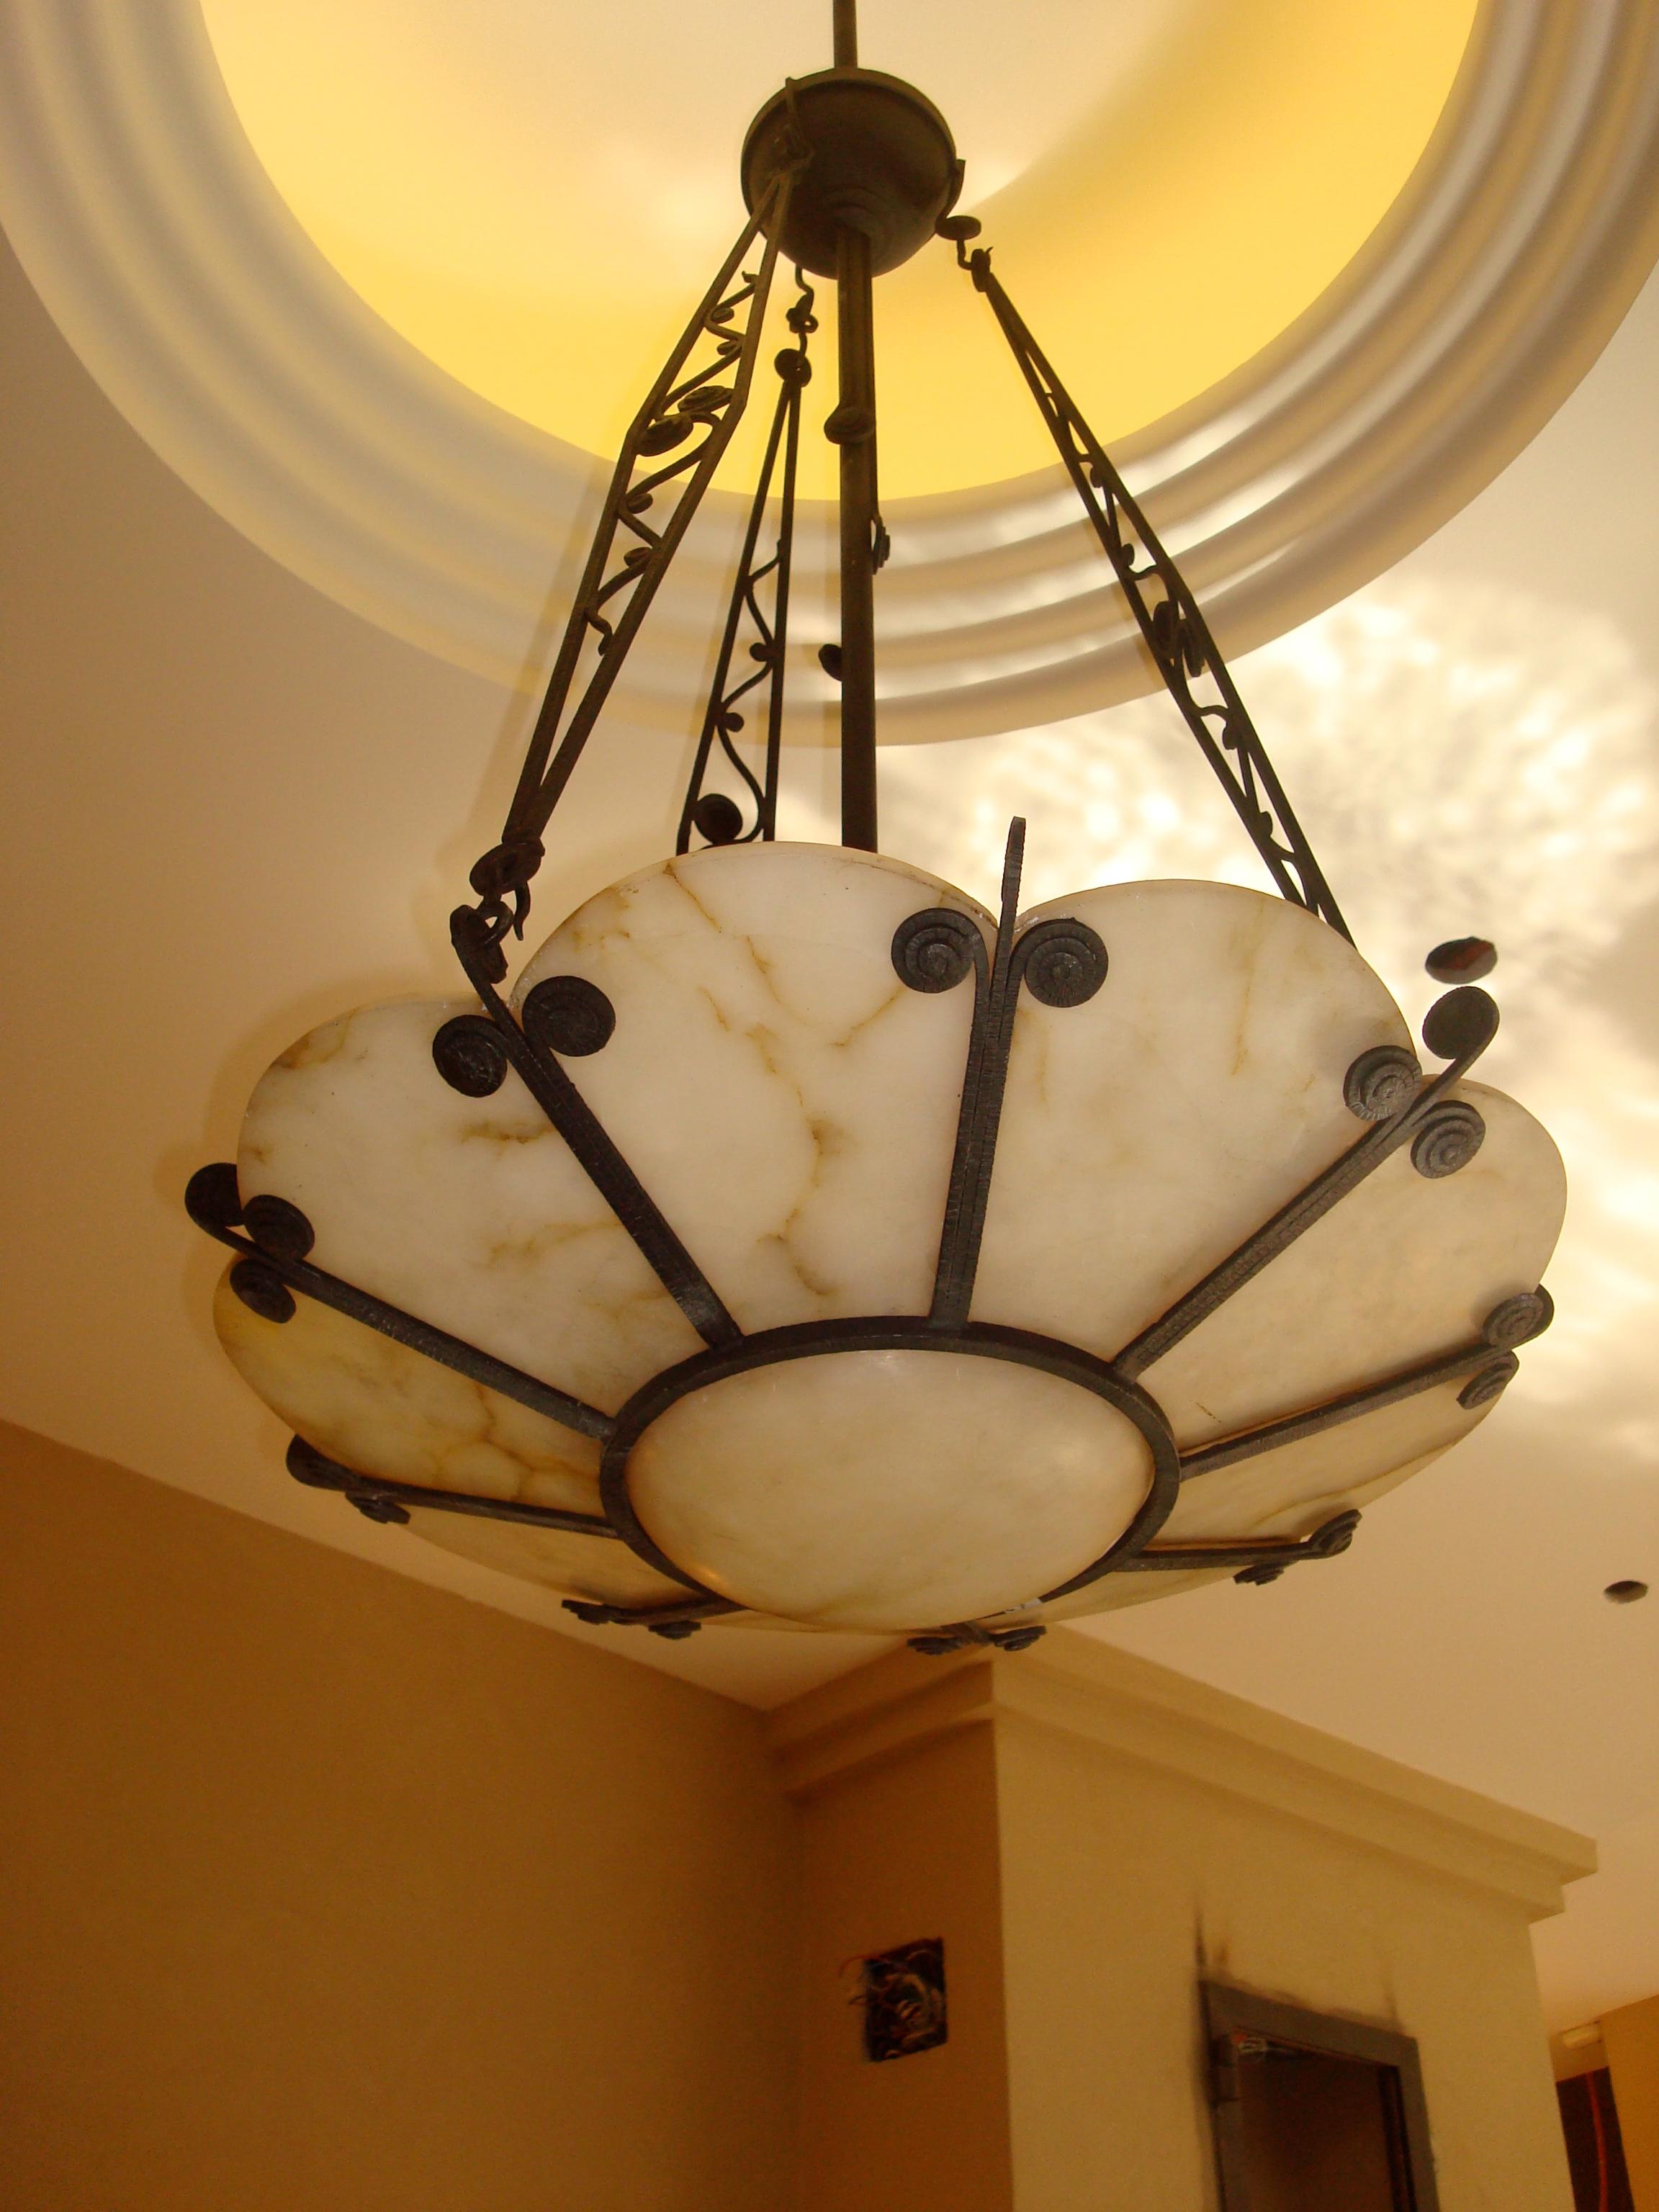 Early 20th Century 2 Chandeliers in Alabaster, Style: Jugendstil, Art Nouveau, Liberty, 1915 For Sale